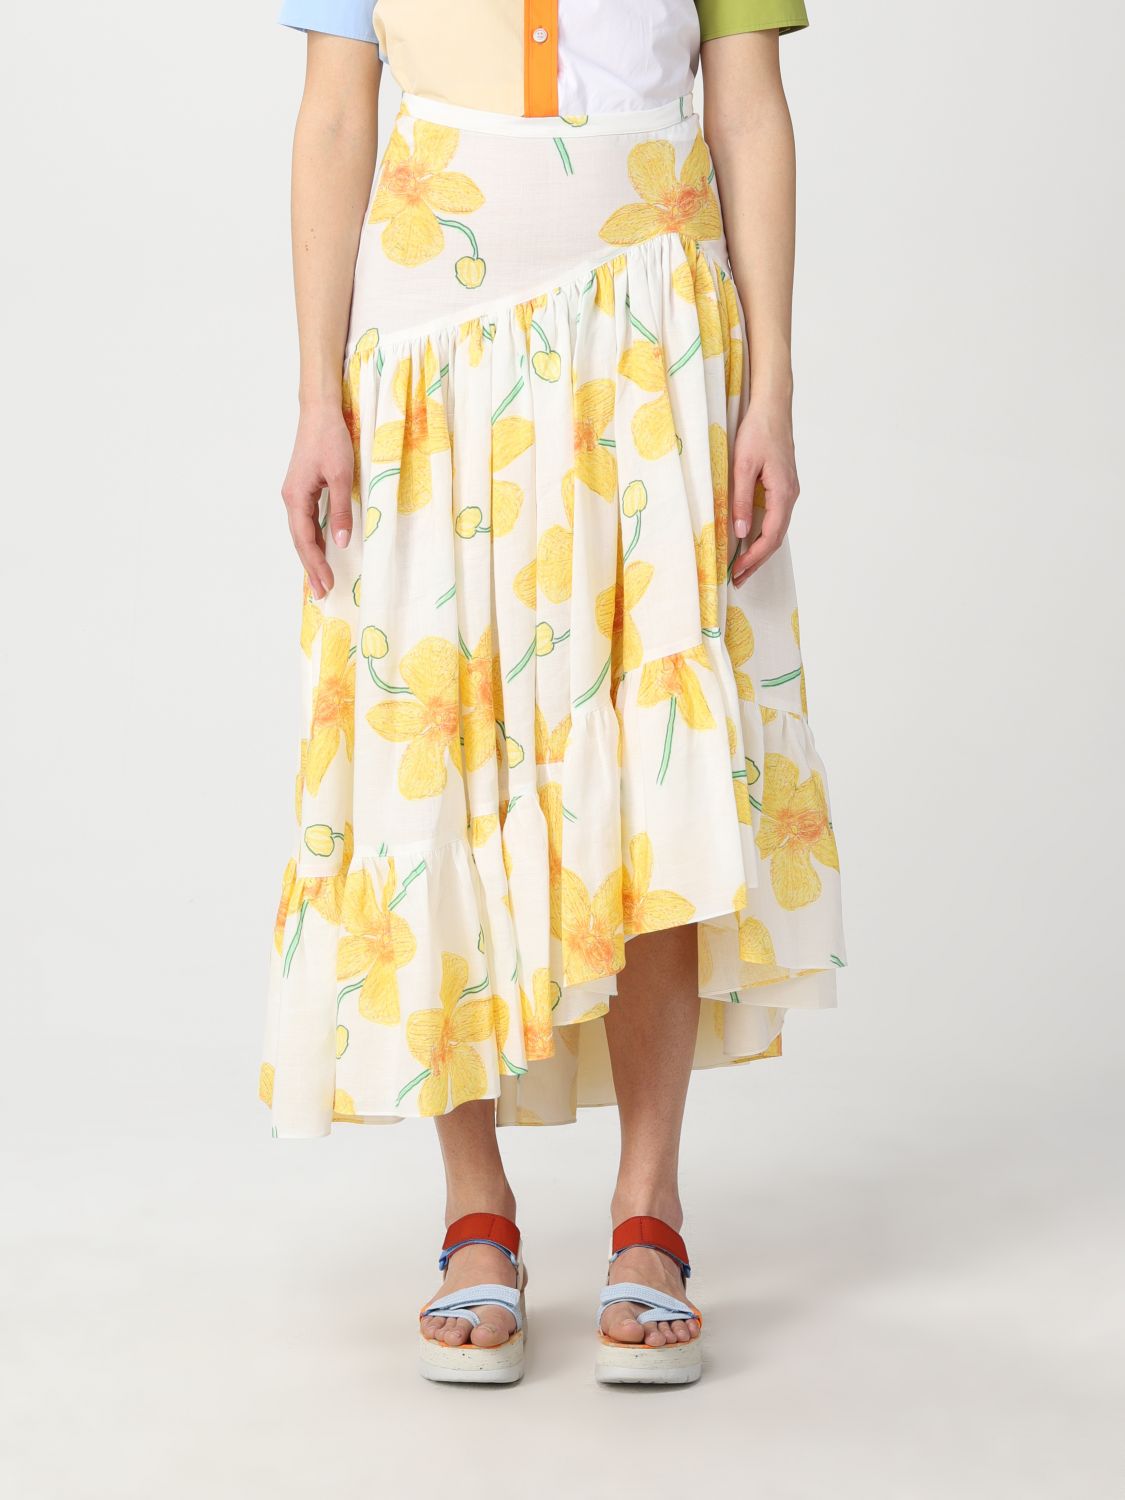 MARNI SKIRT WITH ORCHIDS PRINT BY MAGDALENA SUAREZ FRIMKESS,C91436046